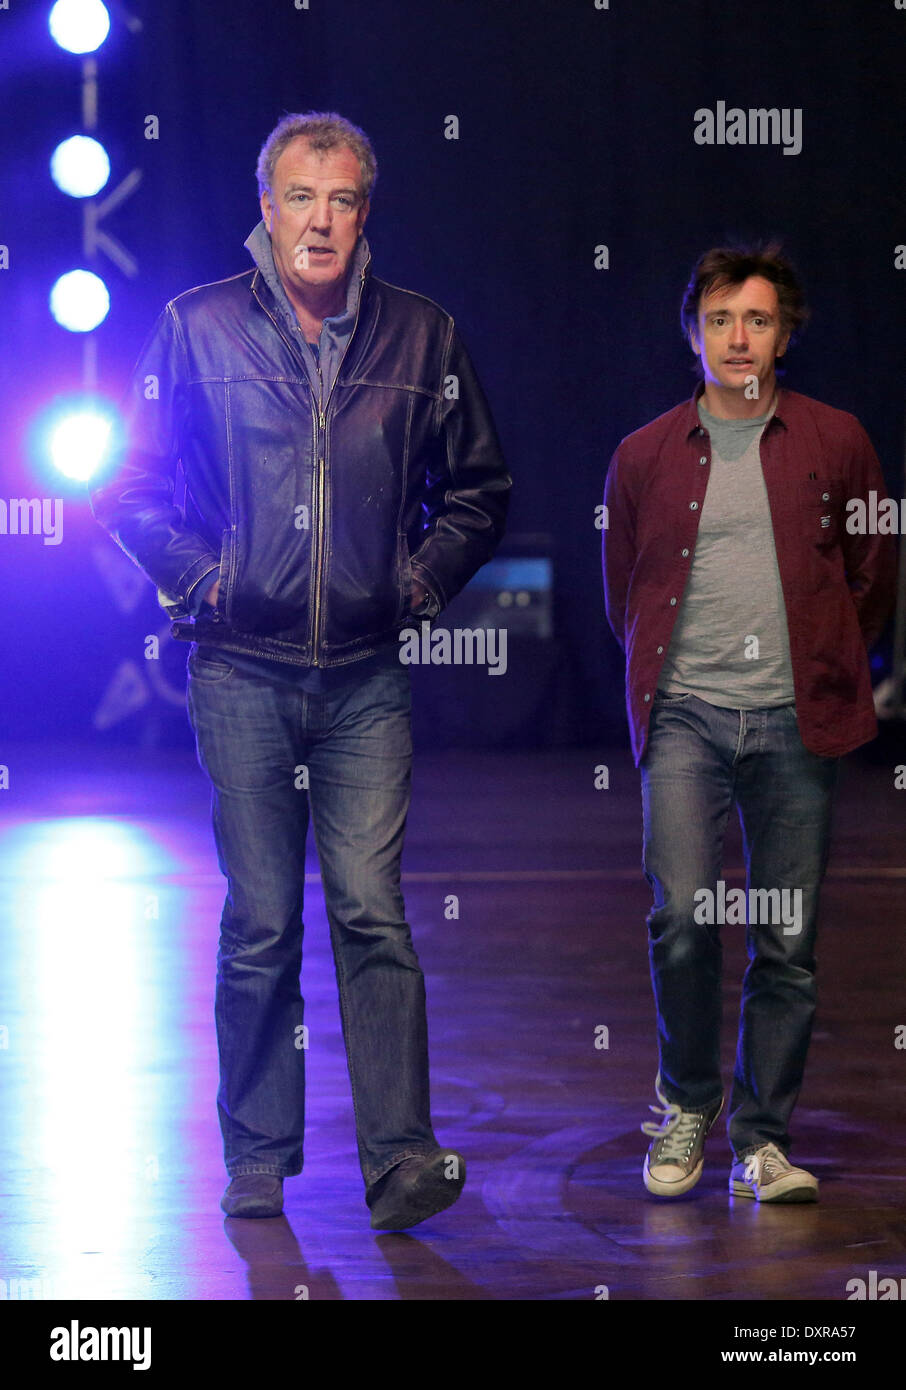 St.Petersburg, Russia. 29th Mar, 2014. In St. Petersburg, passed a car show Top Gear Live. During the rehearsal of the car show Top Gear Live. British TV program Top Gear Jeremy Clarkson and Richard Hammond during a rehearsal for the show Top Gear Live. Credit:  Andrey Pronin/NurPhoto/ZUMAPRESS.com/Alamy Live News Stock Photo